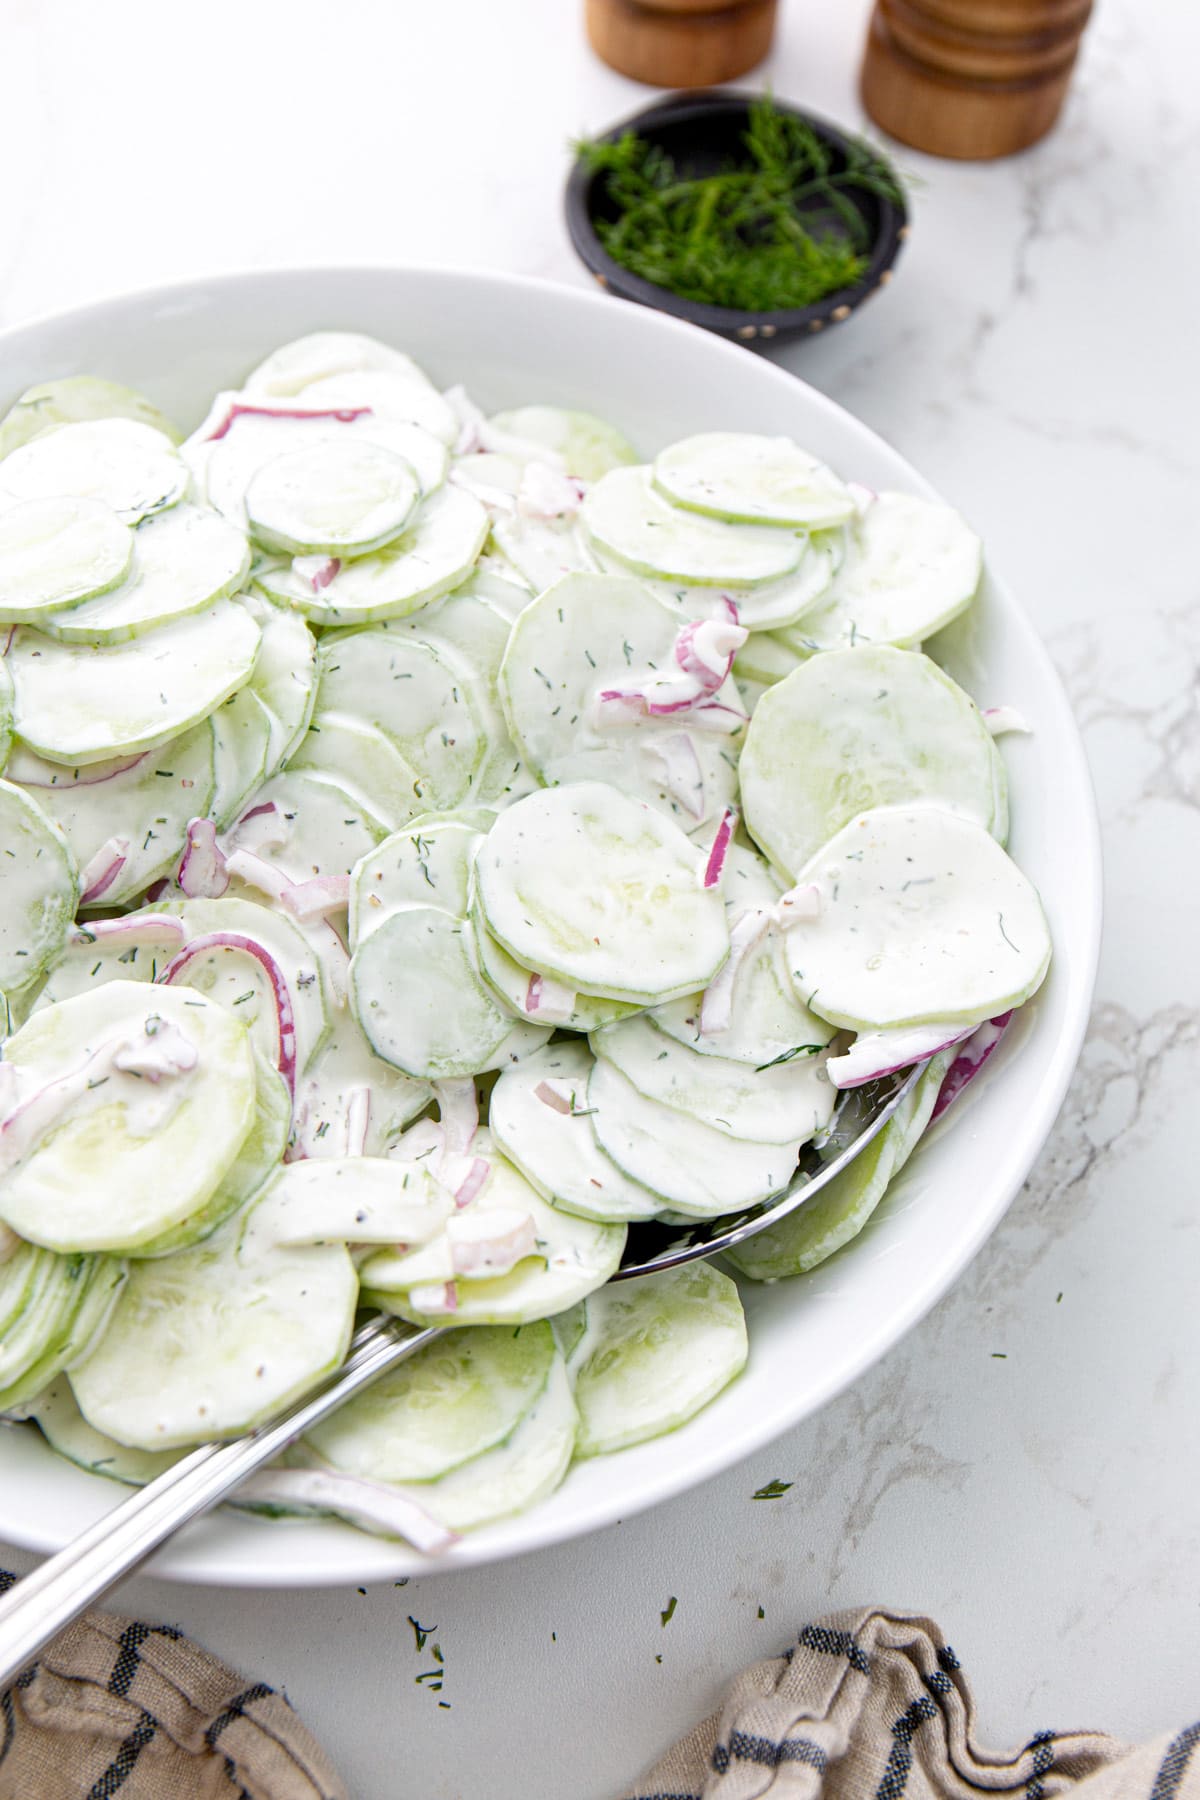 Creamy cucumber salad in a white serving bowl topped with fresh dill.